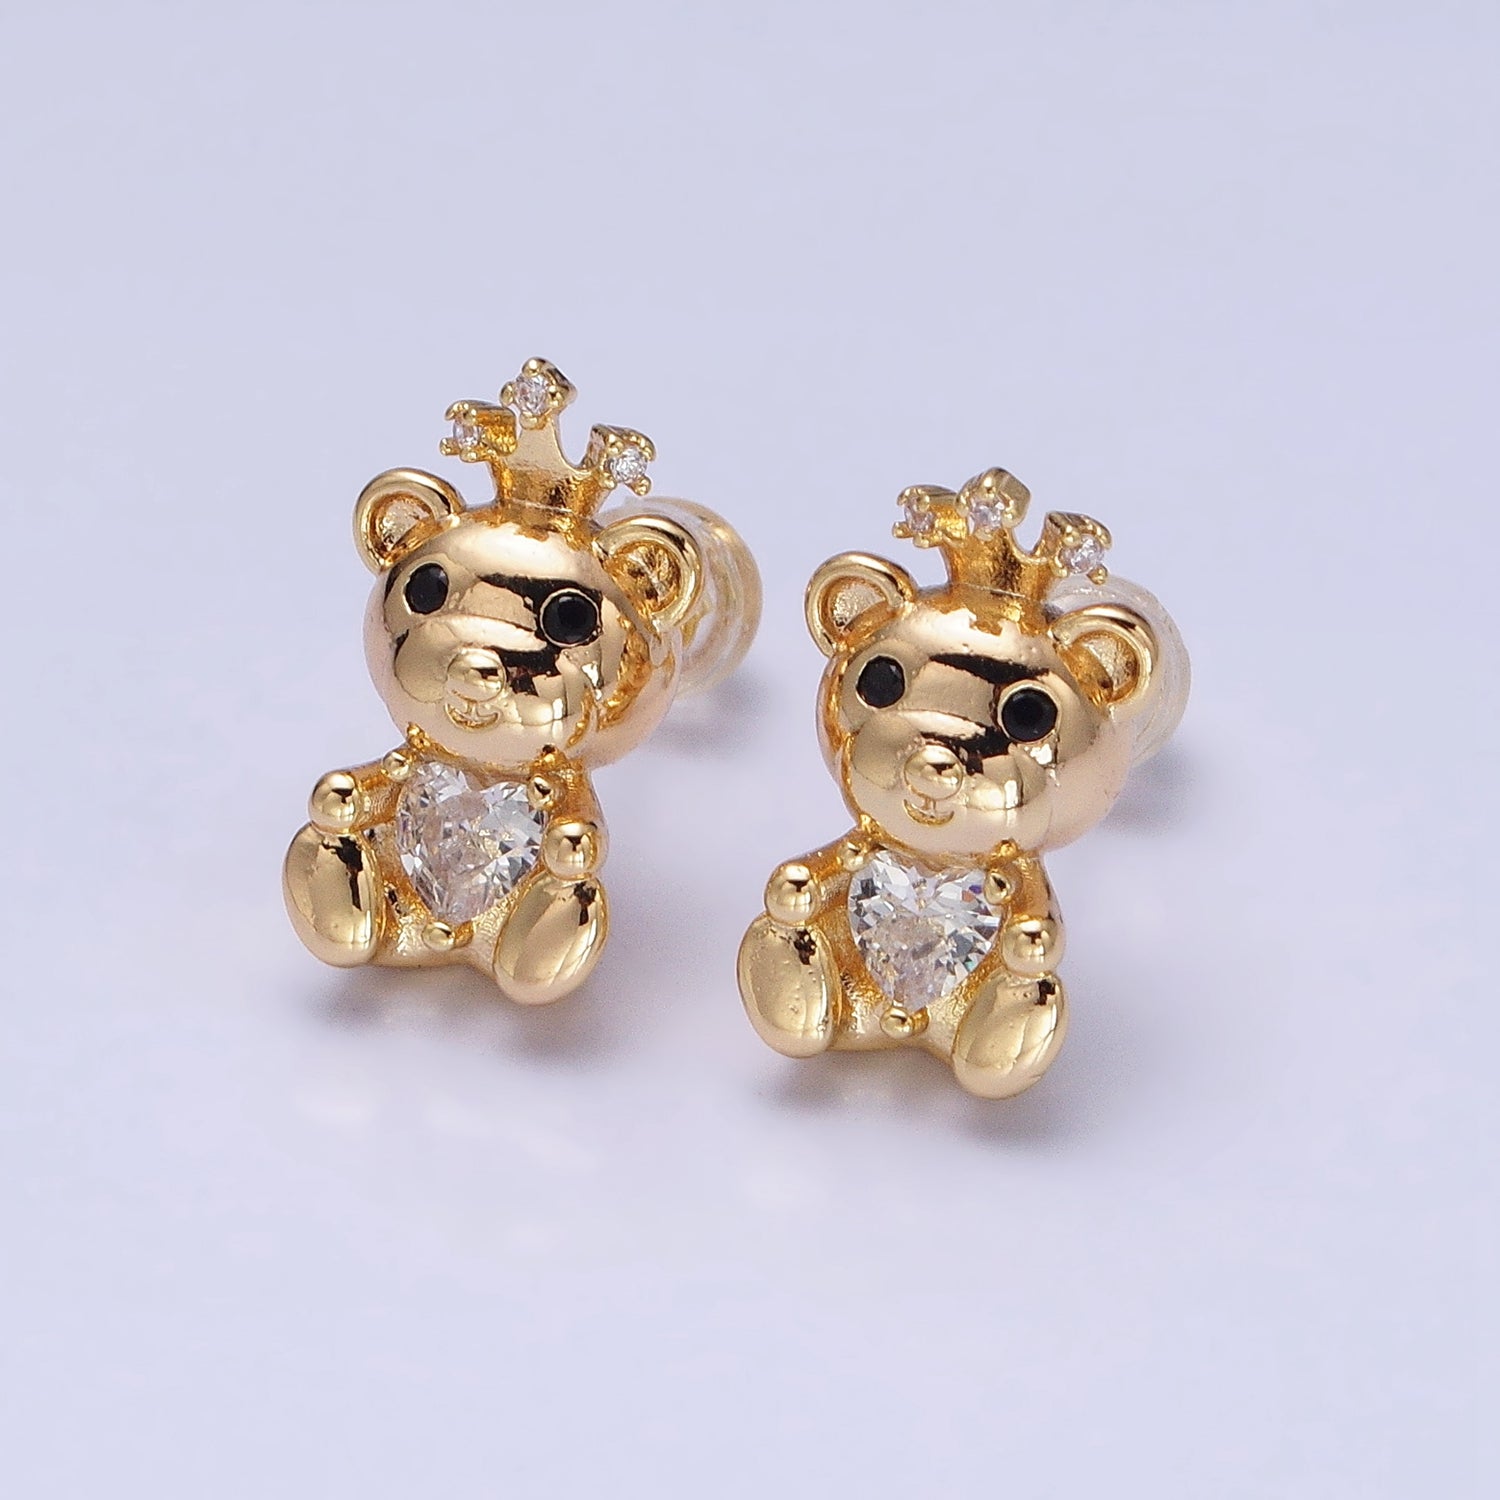 16K Gold Filled Crowned King Teddy Bear Clear CZ Heart Stud Earrings in Silver & Gold | AB1539 AD822